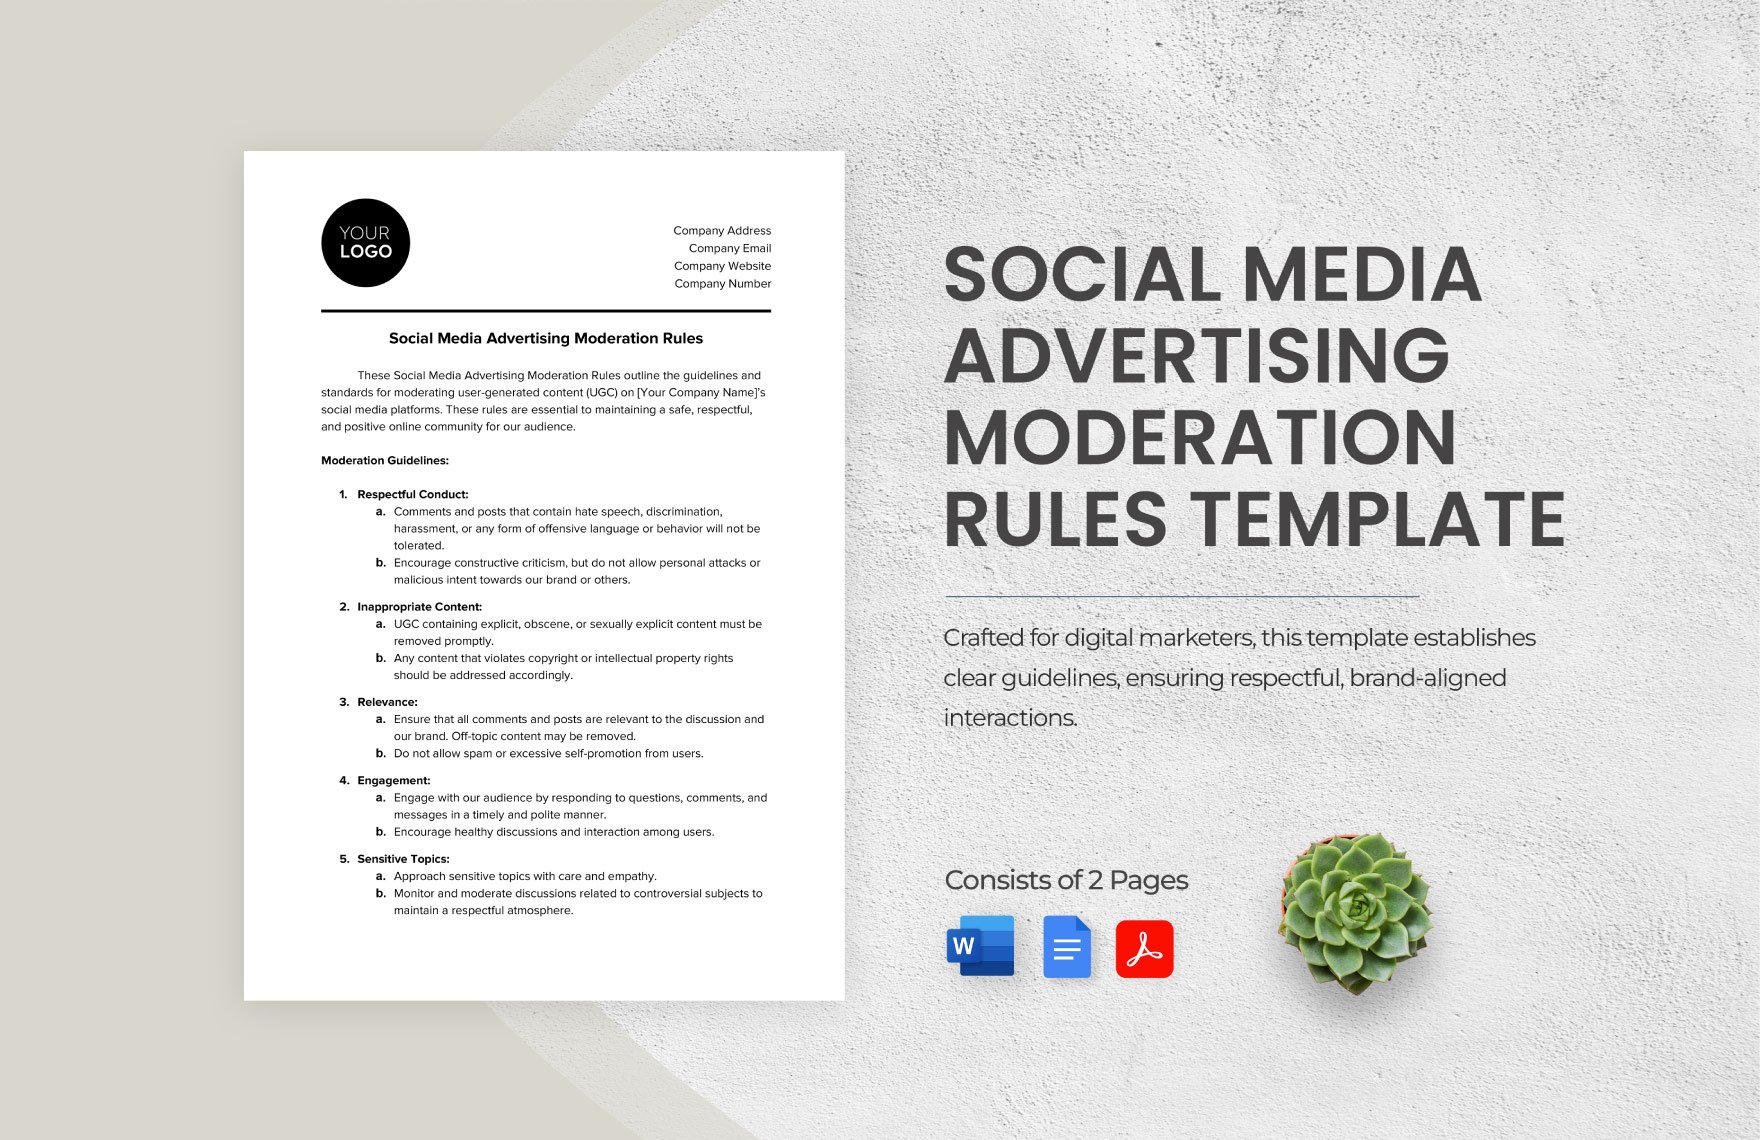 Social Media Advertising Moderation Rules Template in Word, Google Docs, PDF